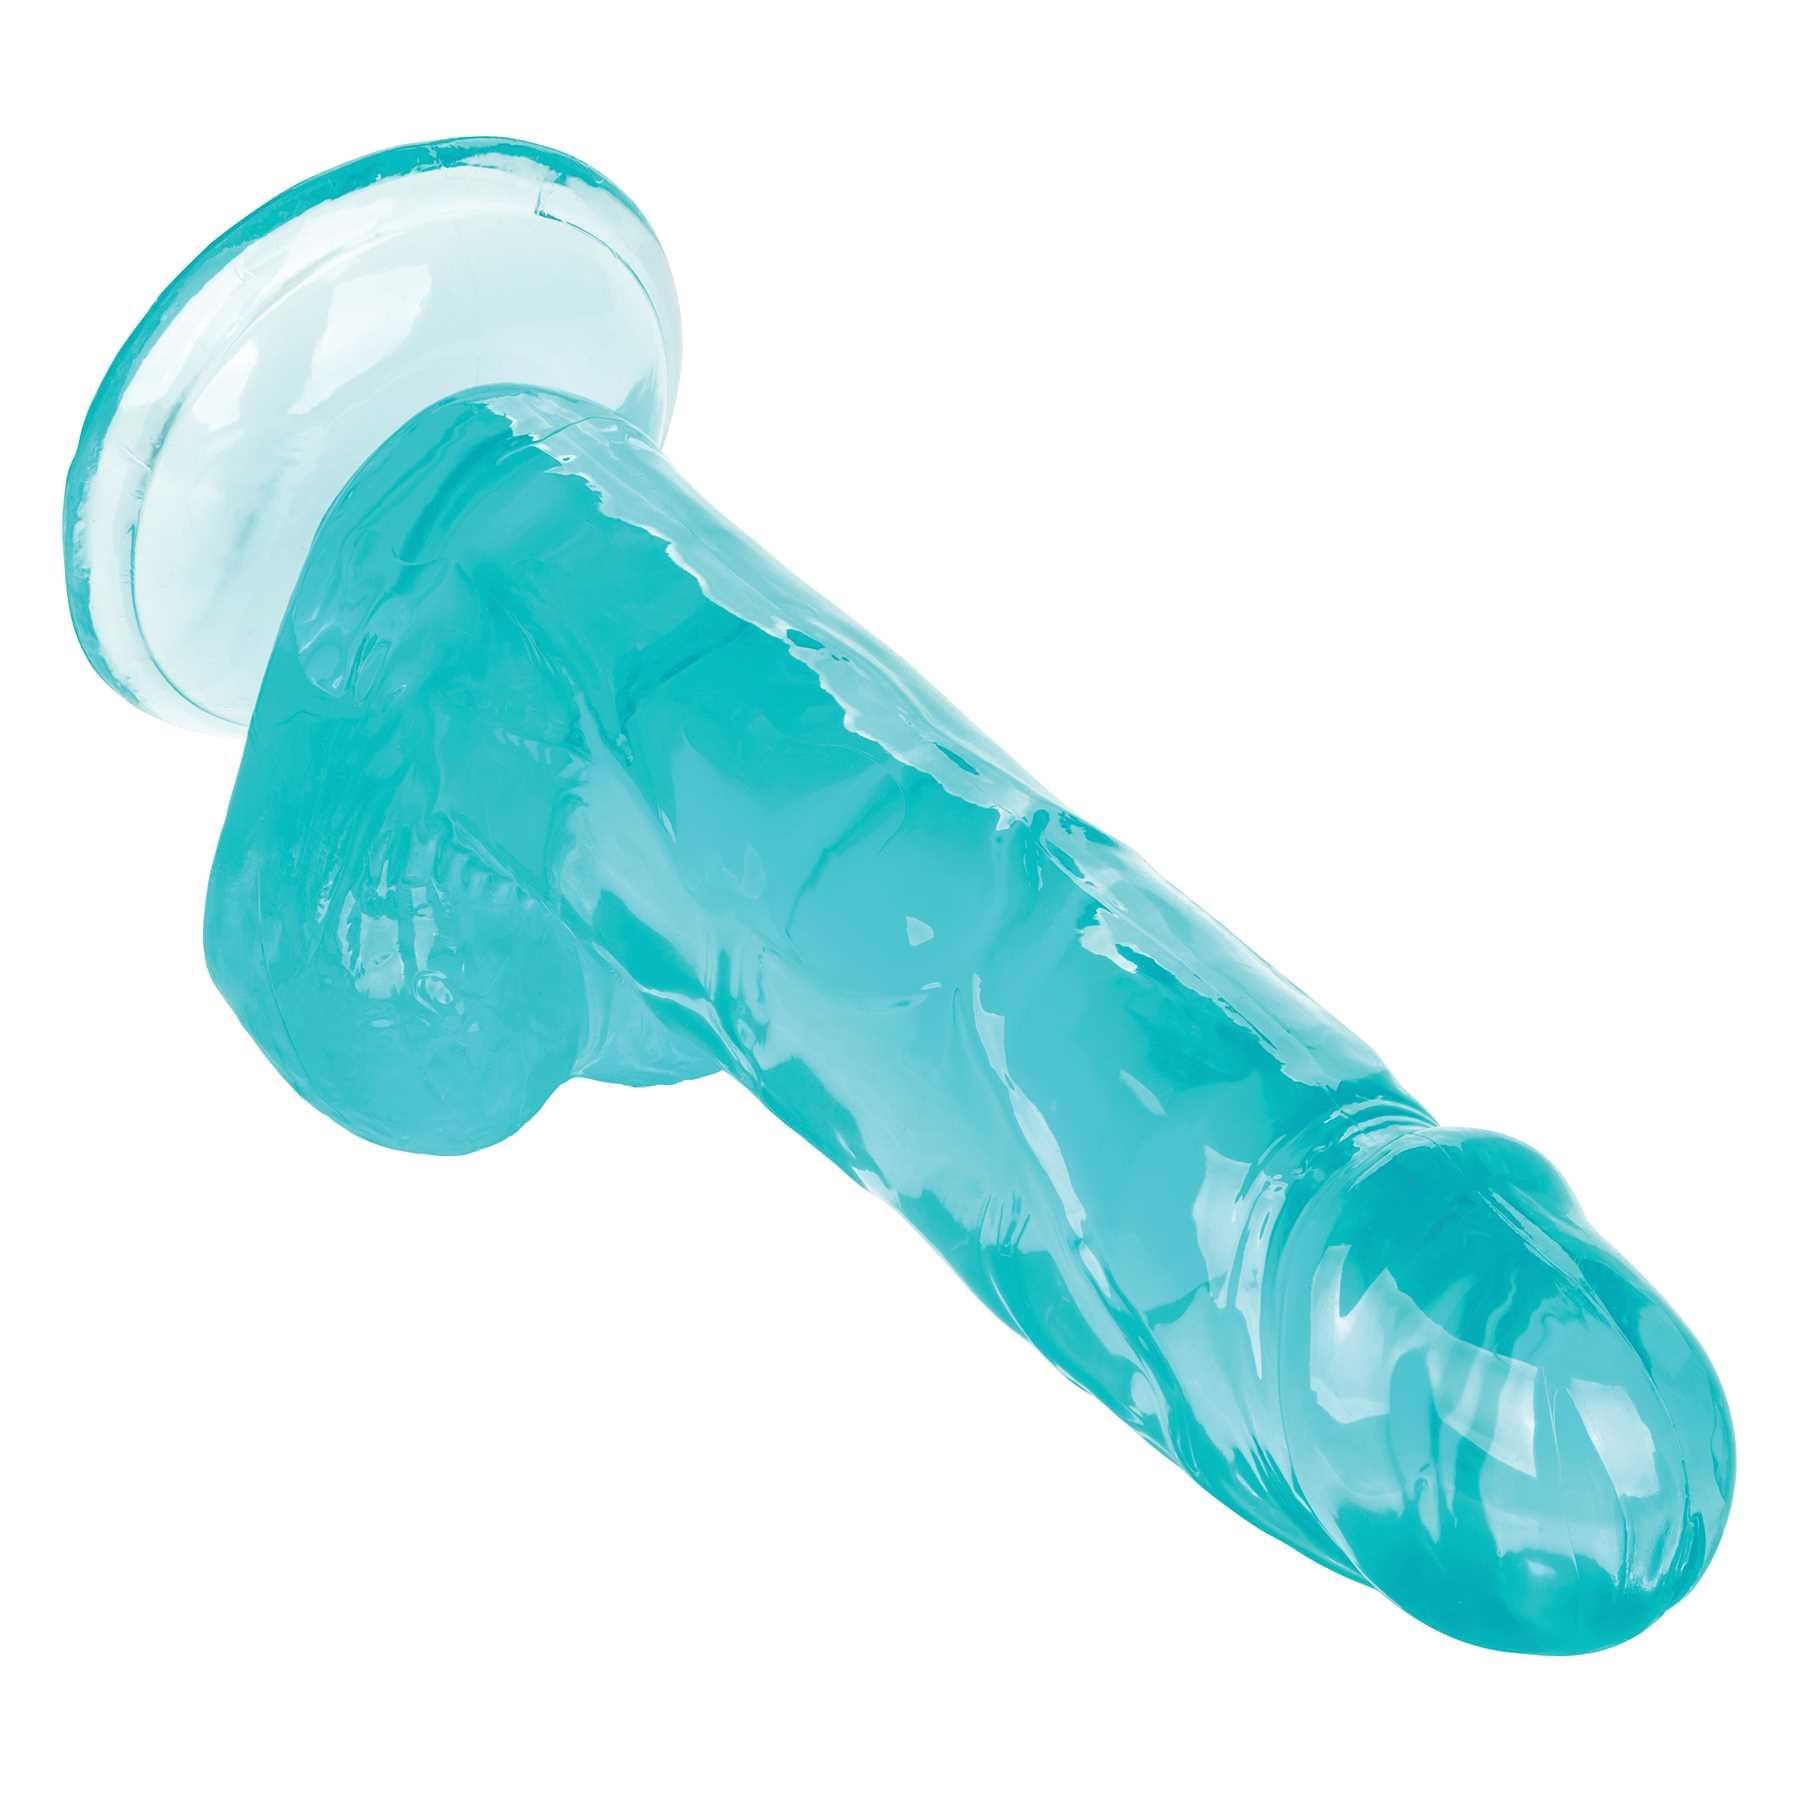 Size Queen 6 Inch Dildo Tip Pointing Downward - Blue